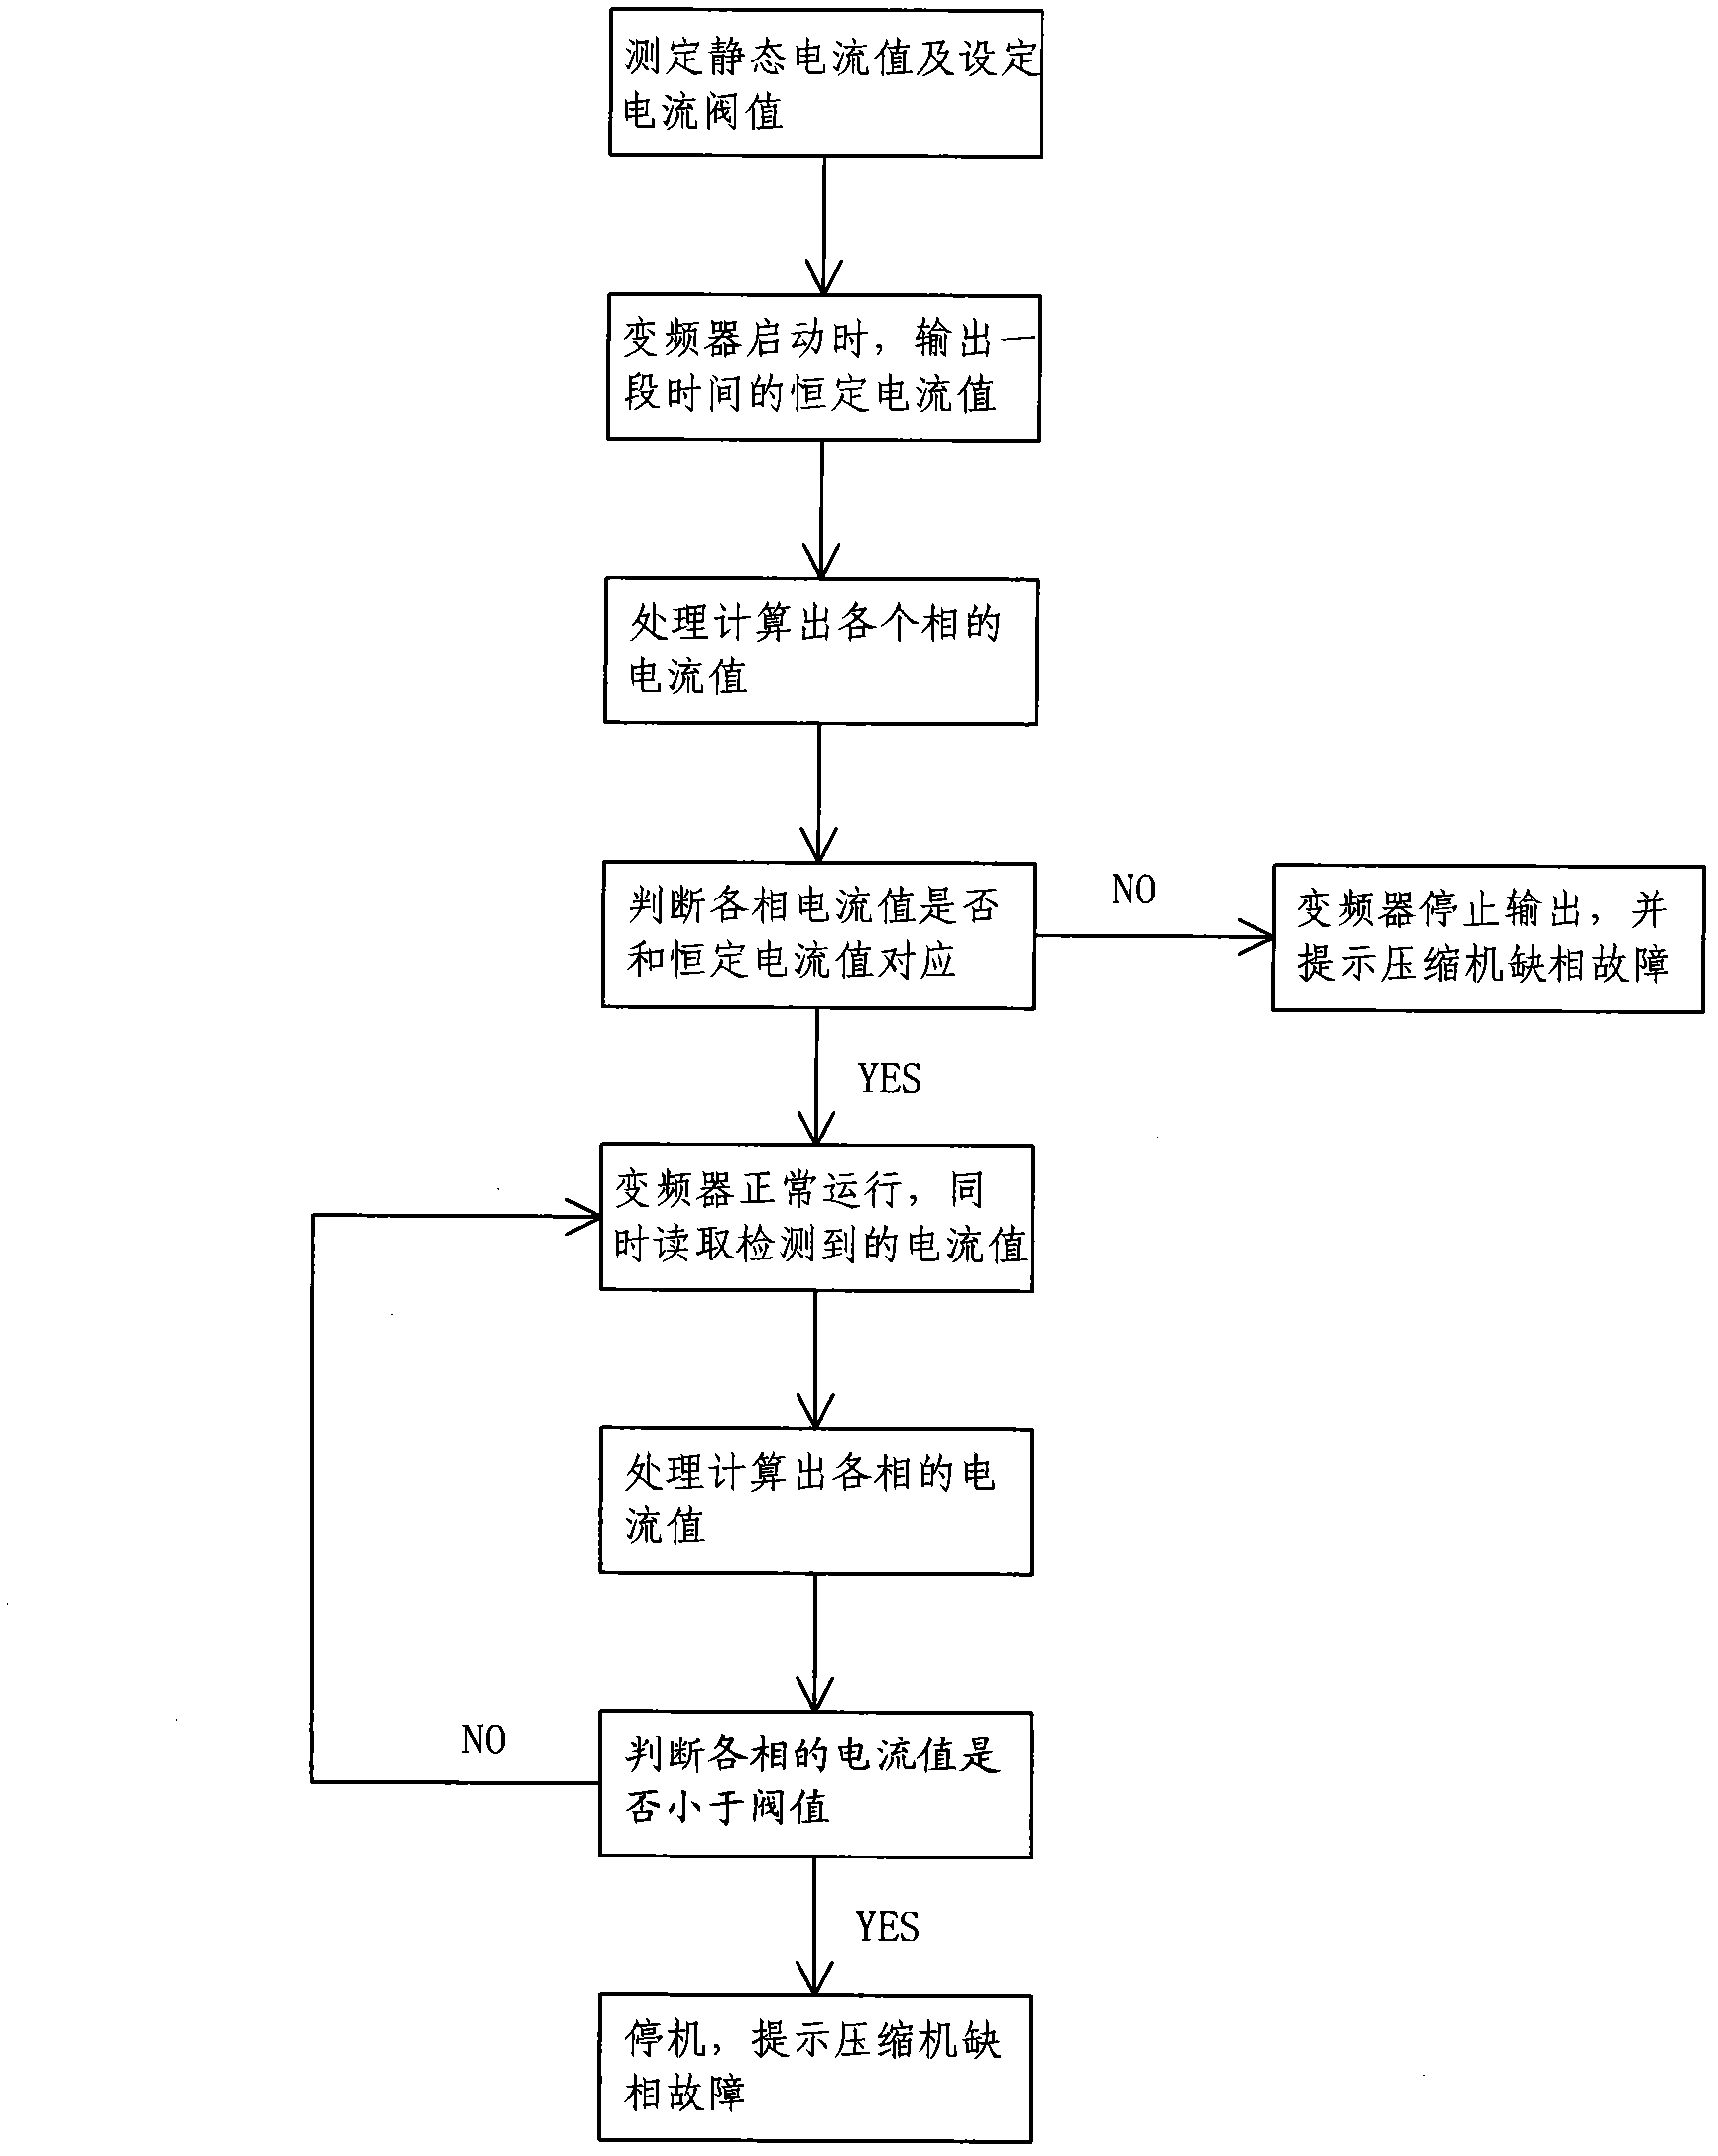 Judgement and protection method for open phase of frequency-conversion air conditioner compressor